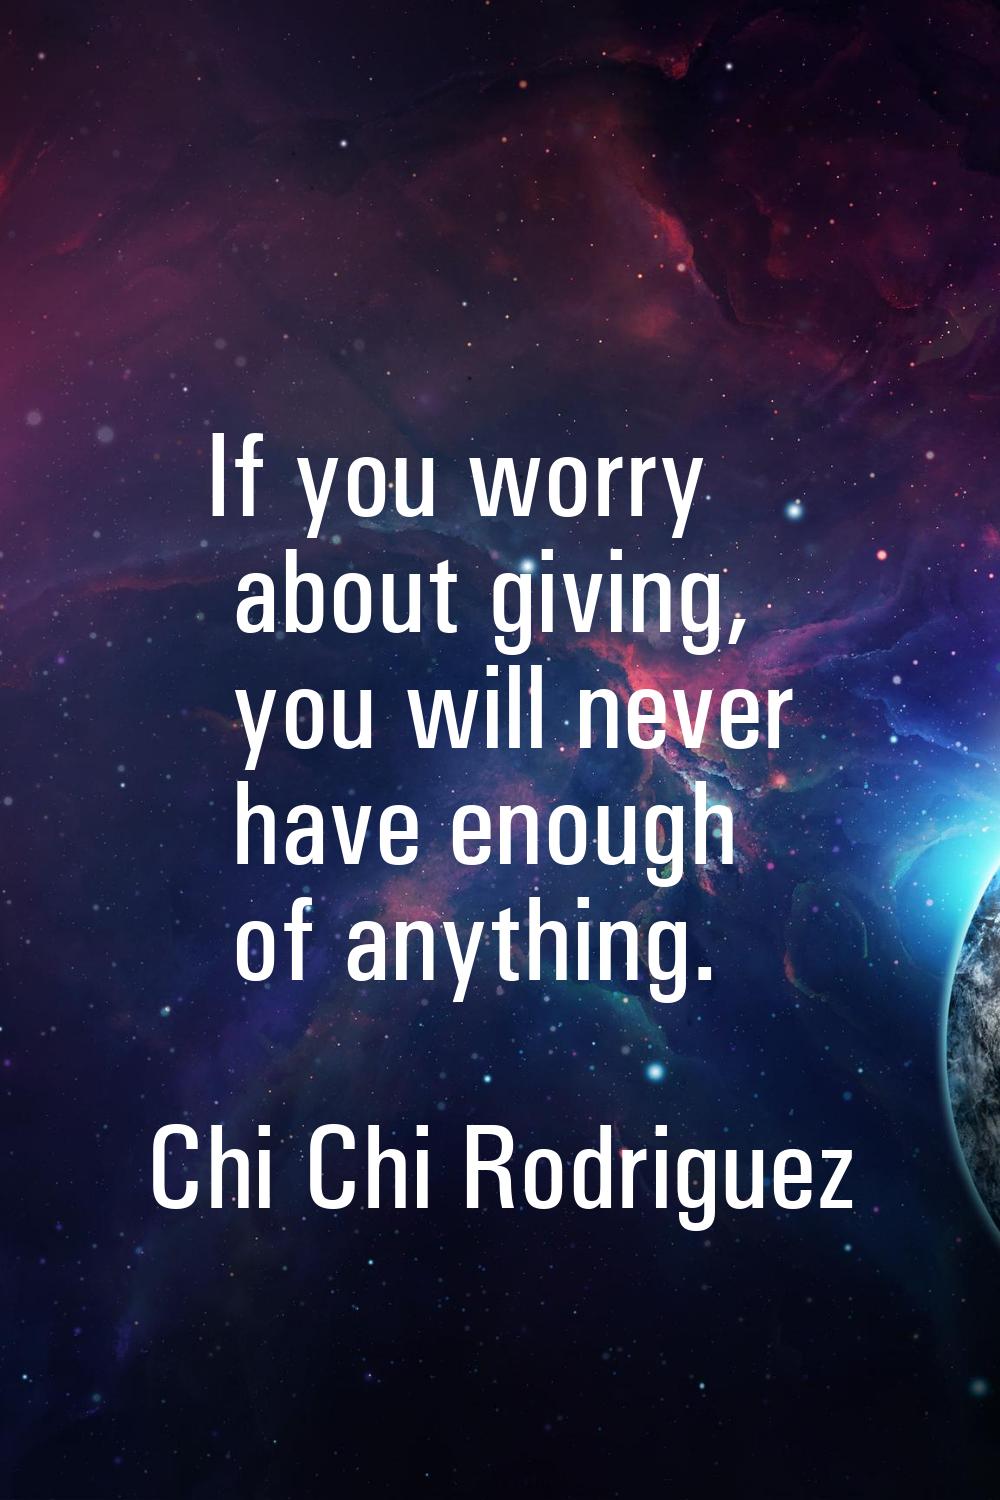 If you worry about giving, you will never have enough of anything.